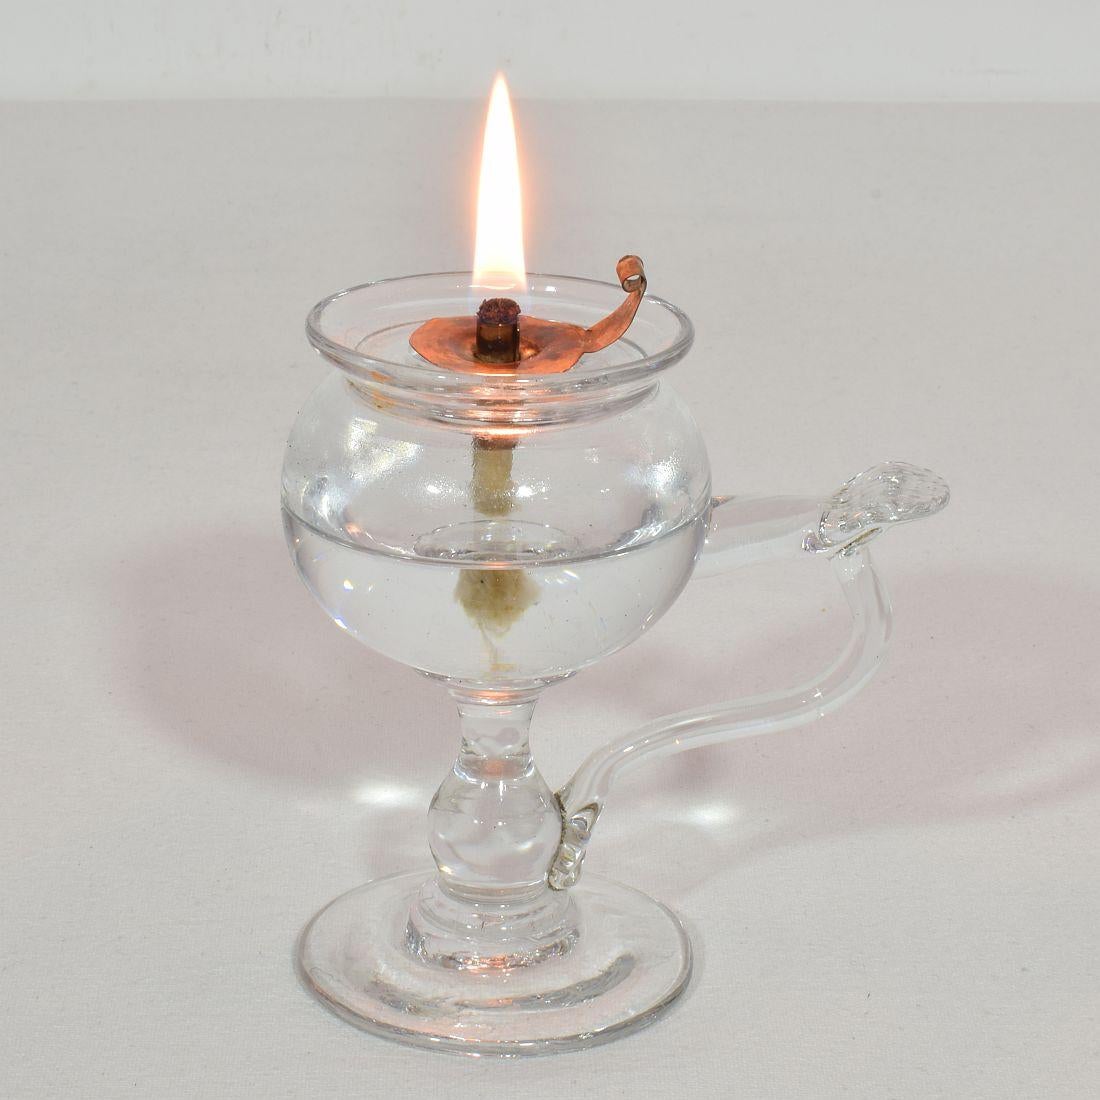 Rare handmade glass weavers oil lamp from the south of France.
France, 19th century. Good condition. Copper wick holder of recent date.